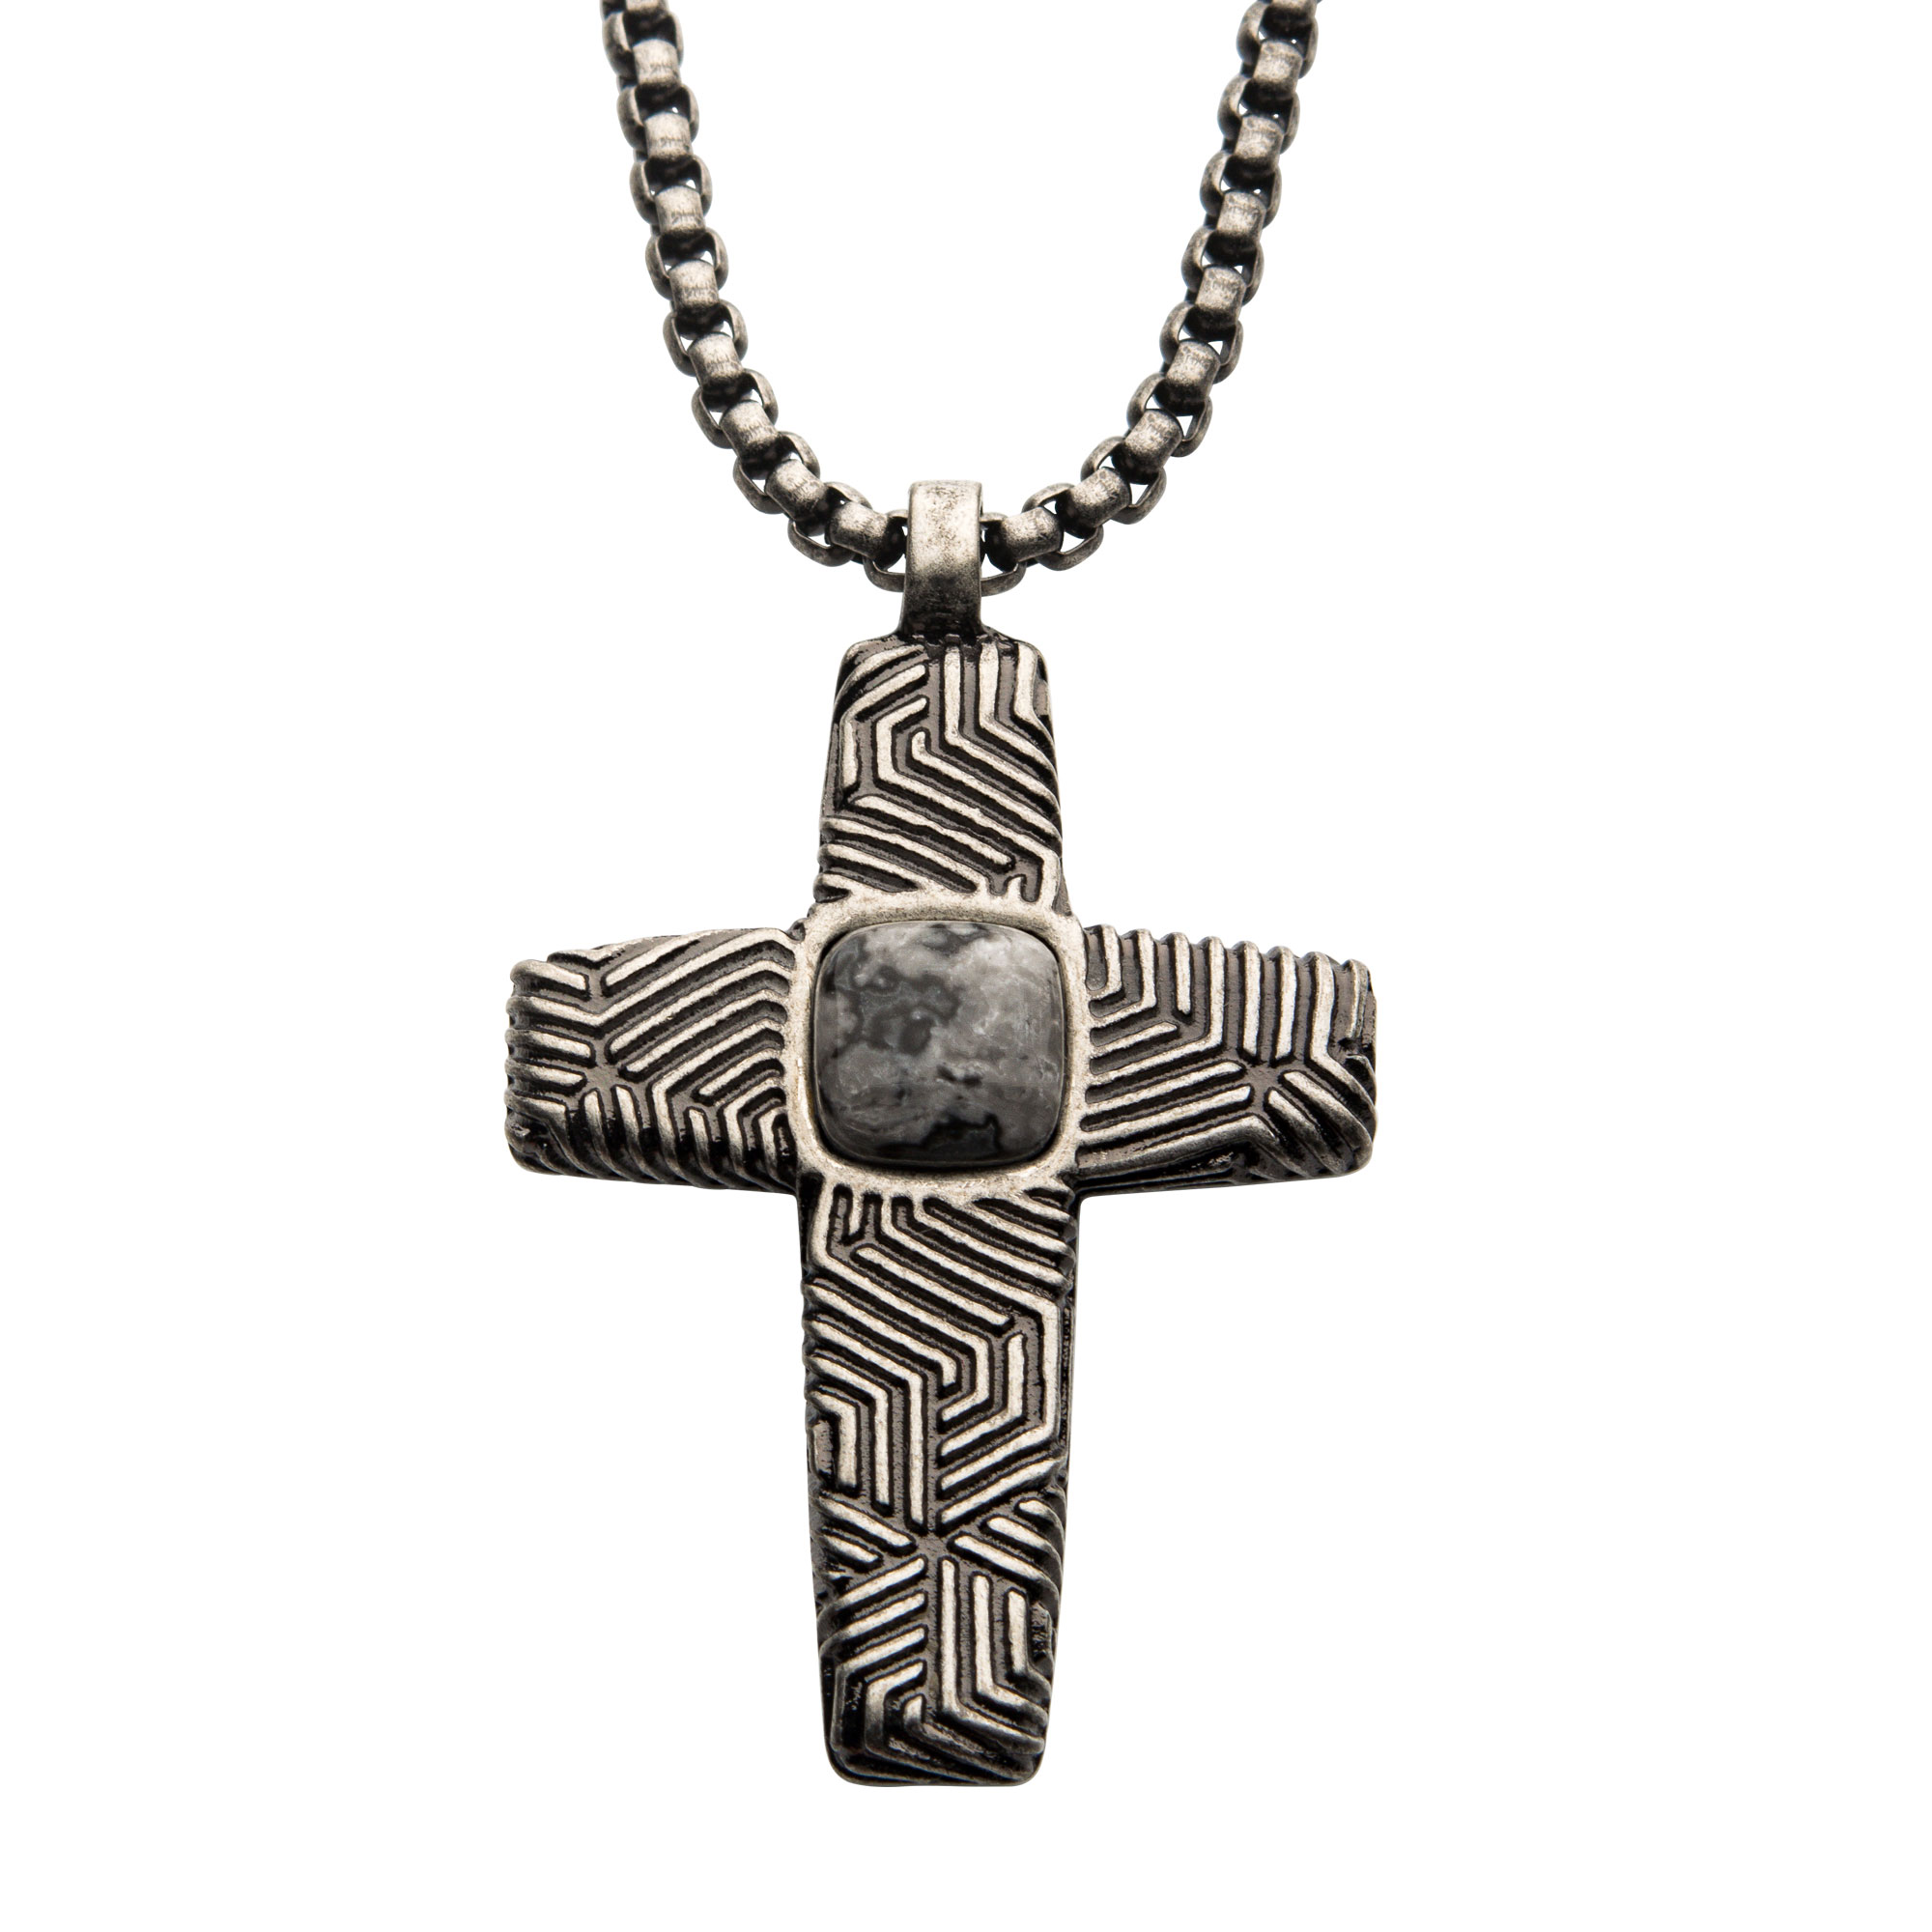 Stainless Steel Silver Plated Cross Pendant with Gray Jasper Stone, with Steel Box Chain Enchanted Jewelry Plainfield, CT